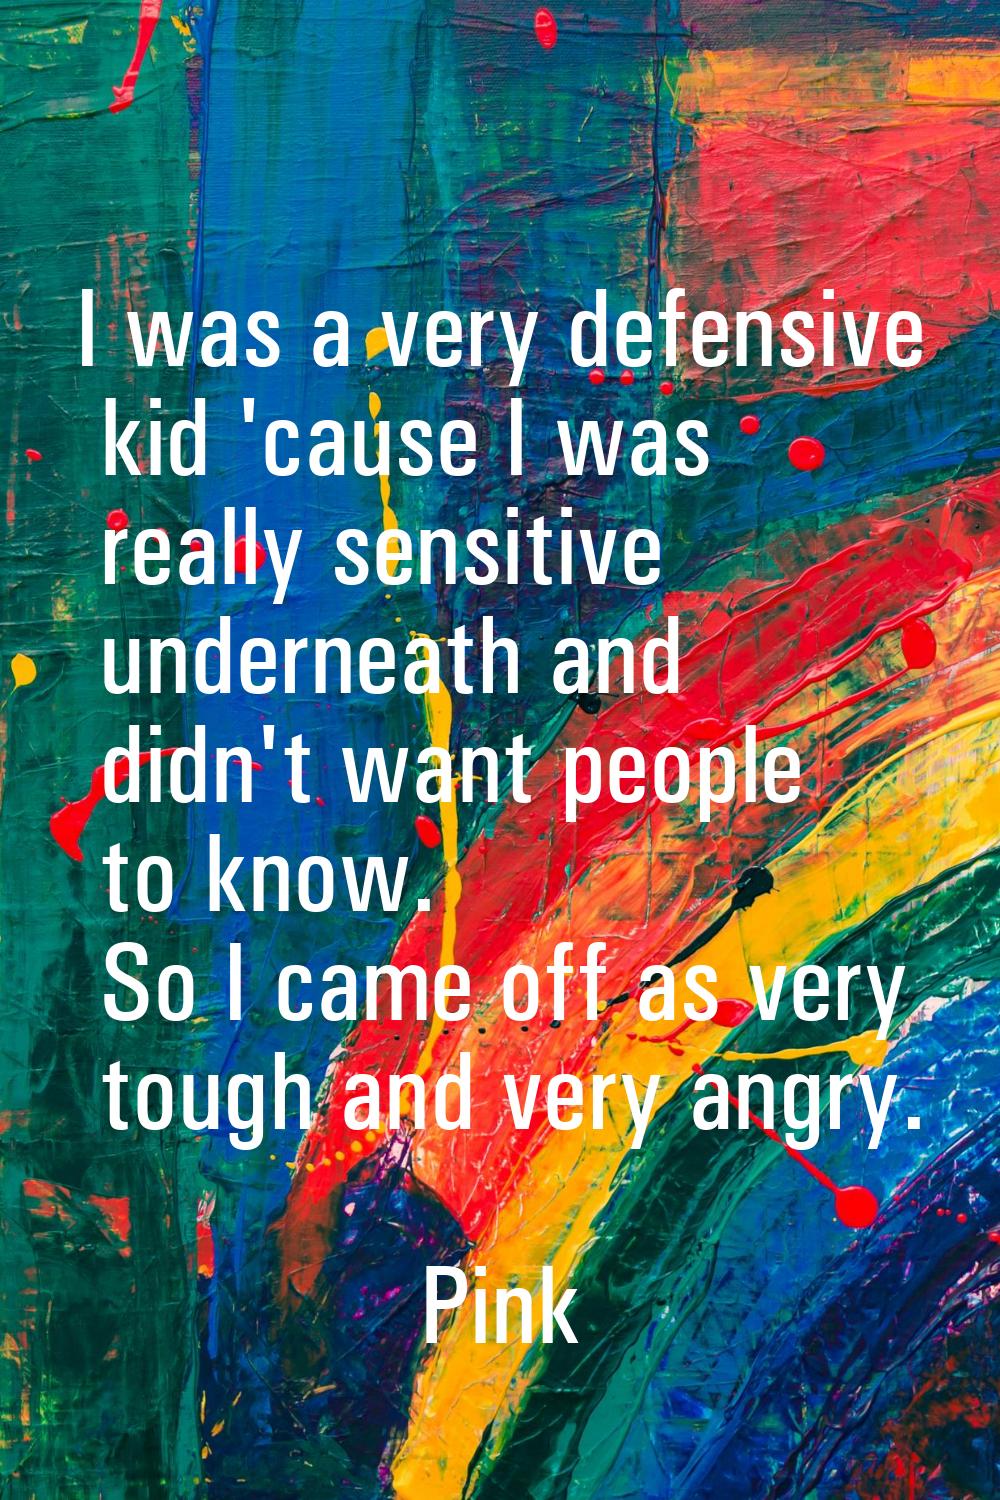 I was a very defensive kid 'cause I was really sensitive underneath and didn't want people to know.